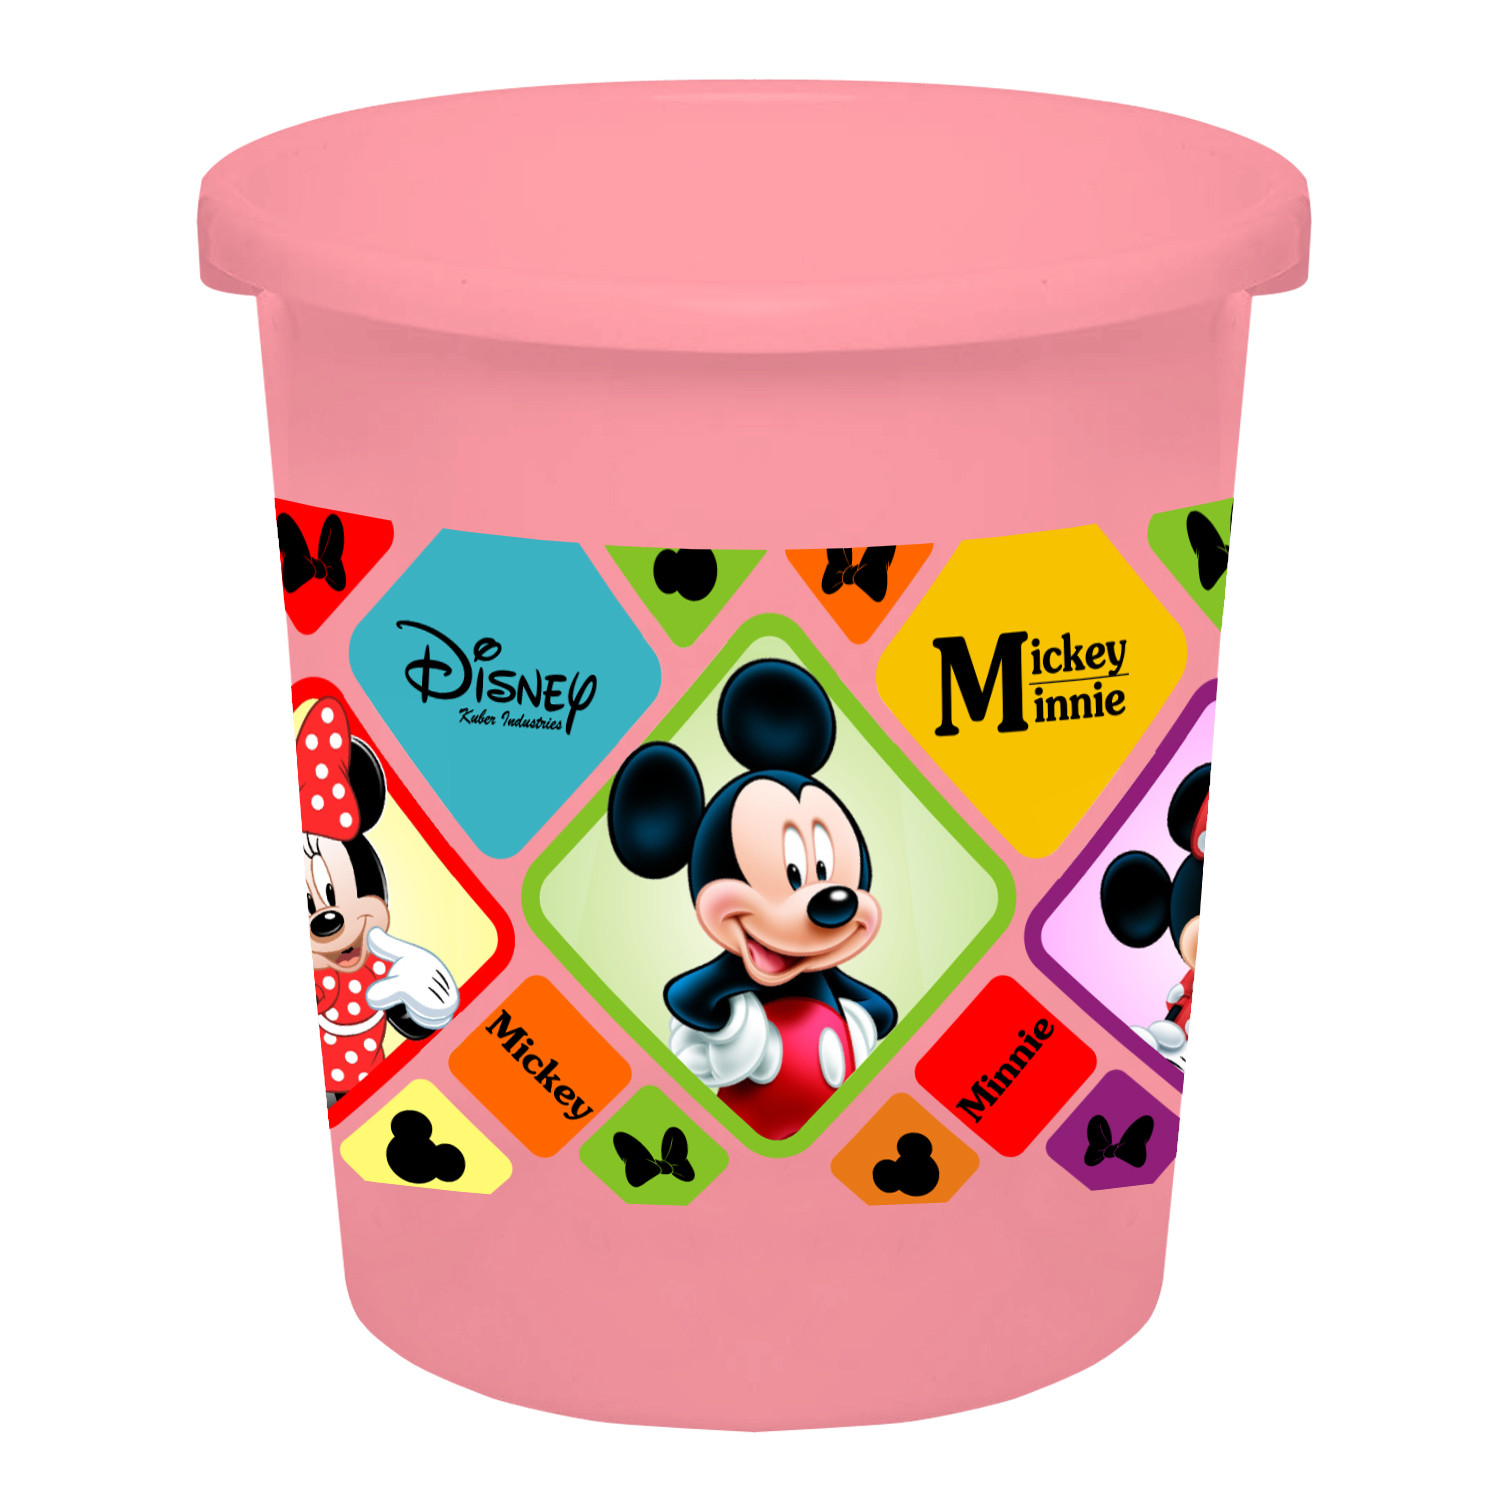 Kuber Industries Disney Mickey Minnie Print Plastic 2 Pieces Garbage Waste Dustbin/Recycling Bin for Home, Office, Factory, 5 Liters (Pink & Blue) -HS_35_KUBMART17787